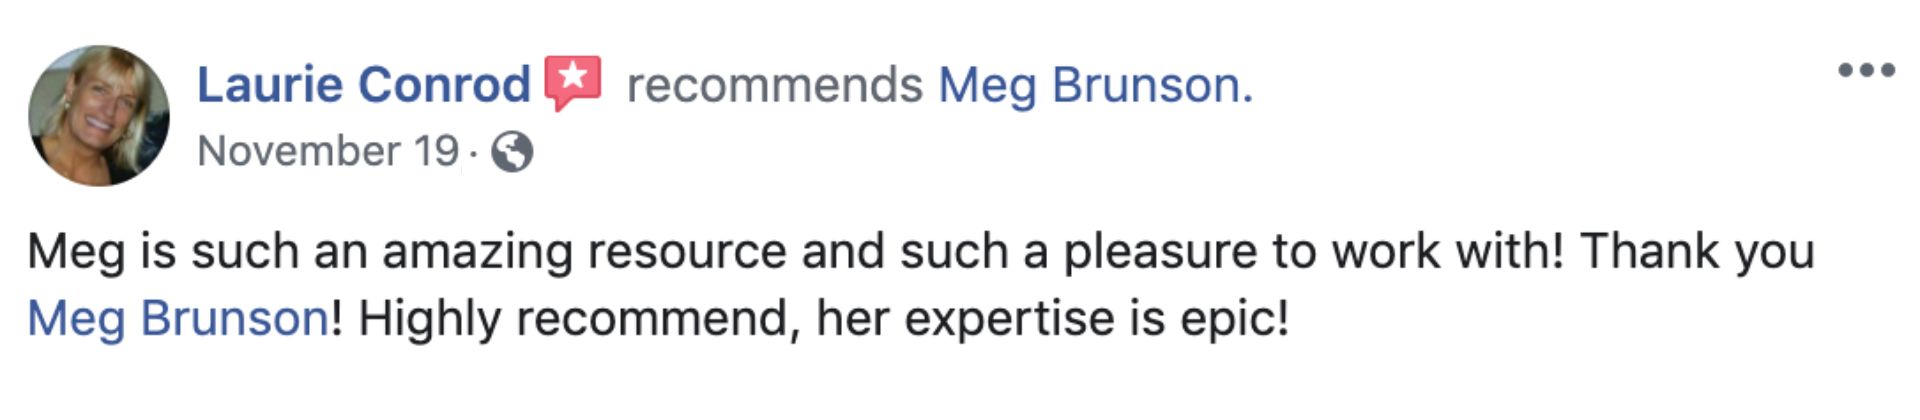 Meg is such an amazing resource and such a pleasure to work with! Thank you Meg Brunson! Highly recommend, her expertise is epic! - Laurie Conrad. Screenshot from Facebook.